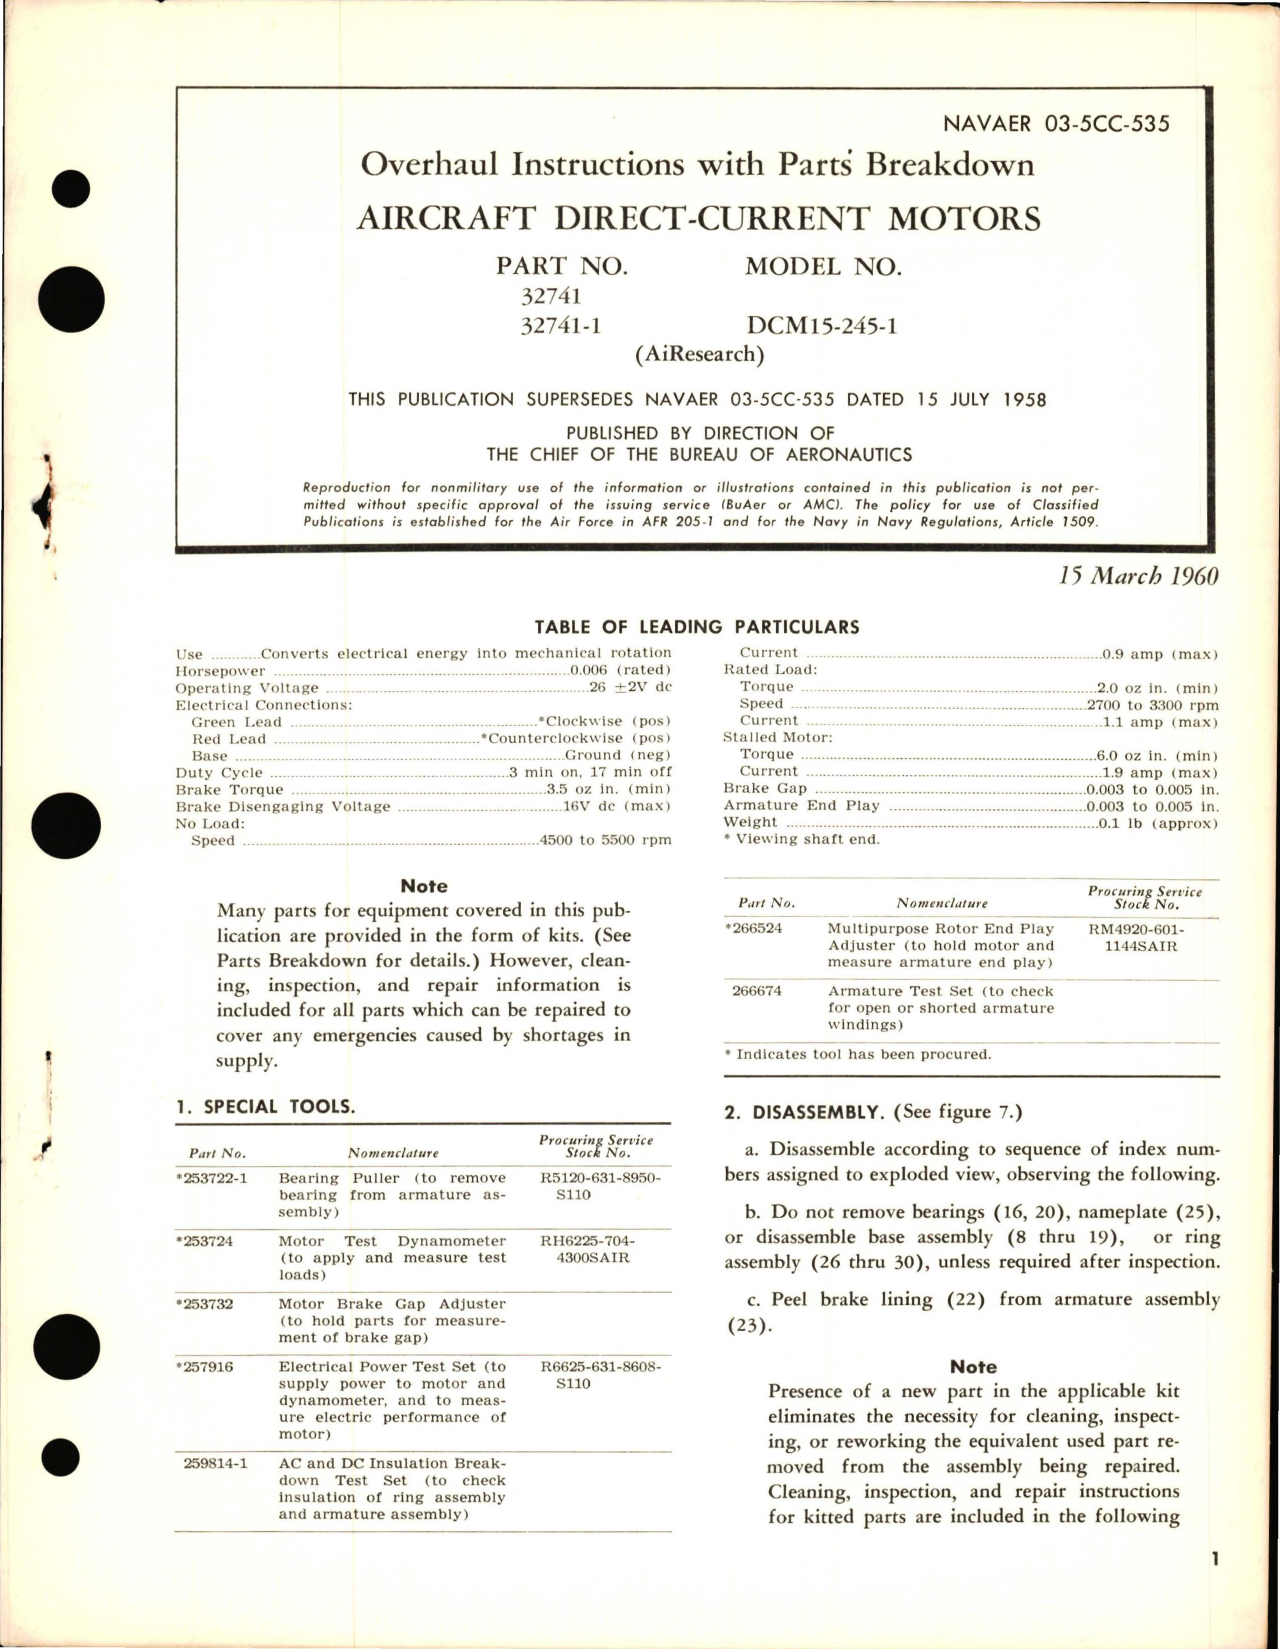 Sample page 1 from AirCorps Library document: Overhaul Instructions with Parts Breakdown for Aircraft Direct Current Motors - Parts 32741 and 32741-1 